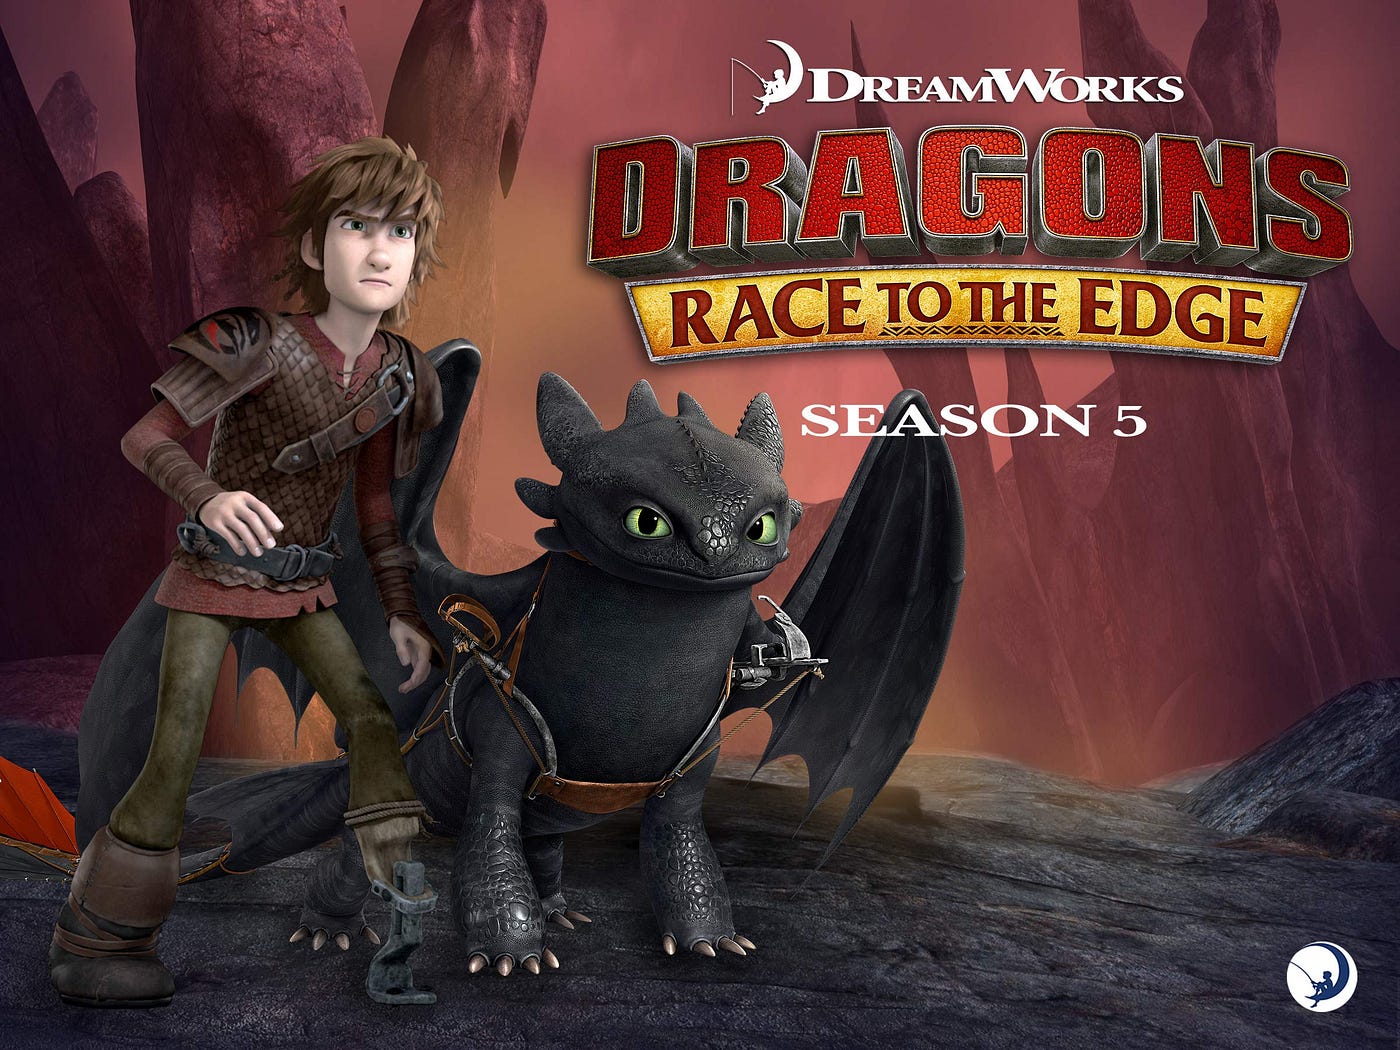 How to Train Your Dragon Race to the Edge Dreamworks Battle